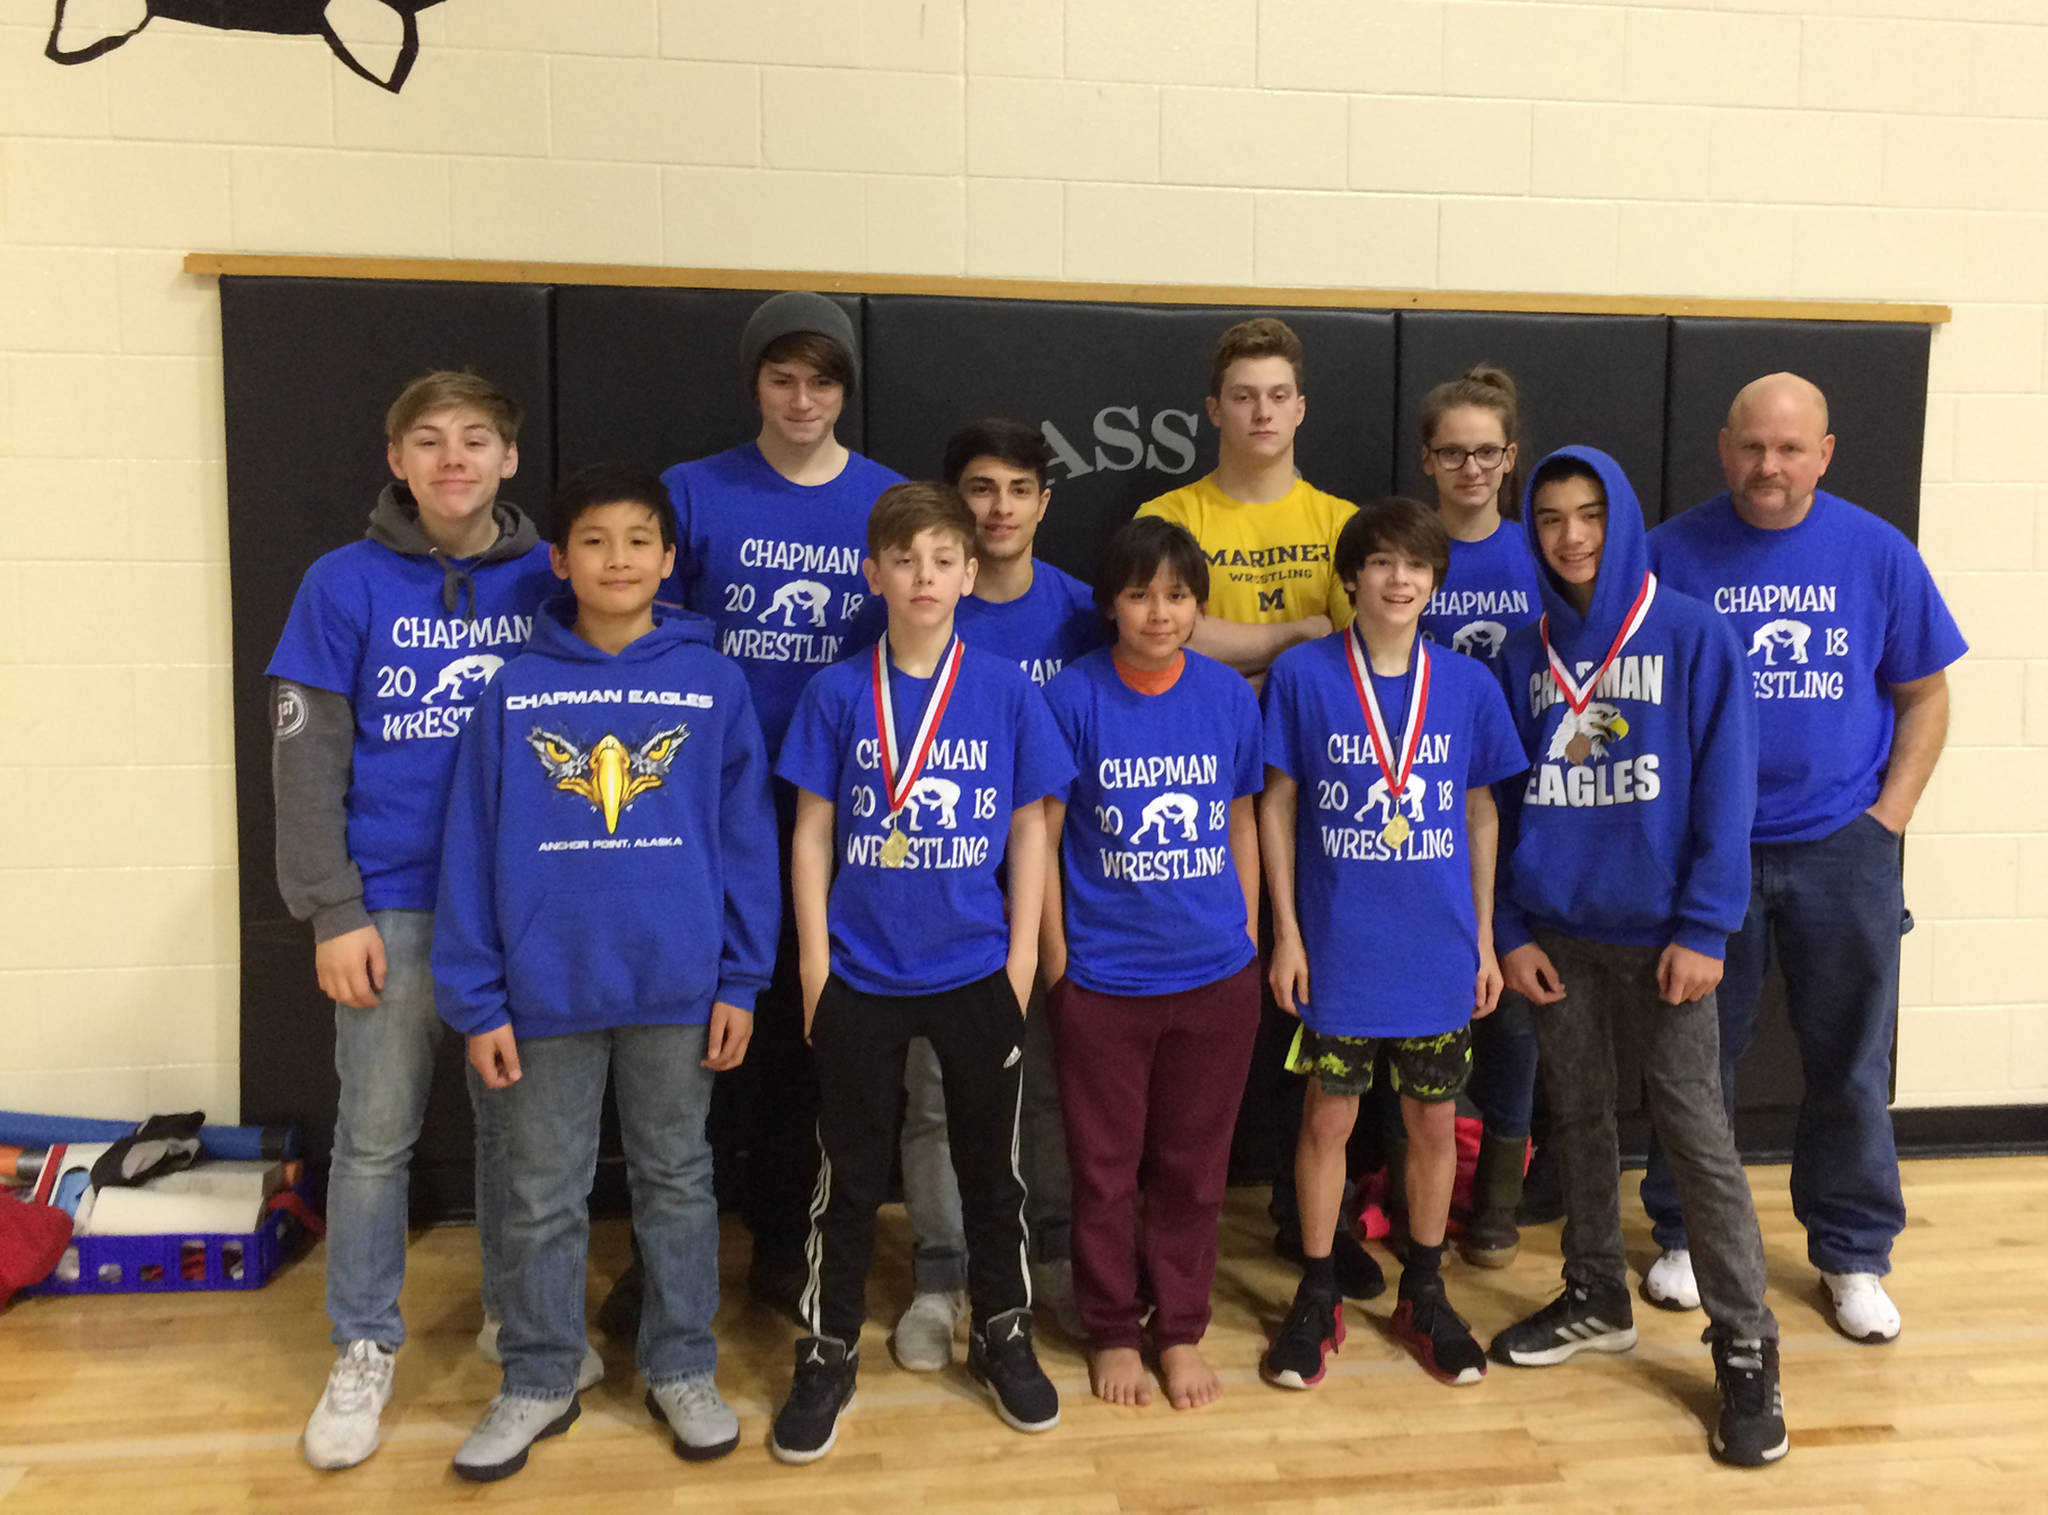 Chapman School’s wrestling team poses after competing in a borough level meet Saturday, Feb. 24, 2018. (Photo submitted)